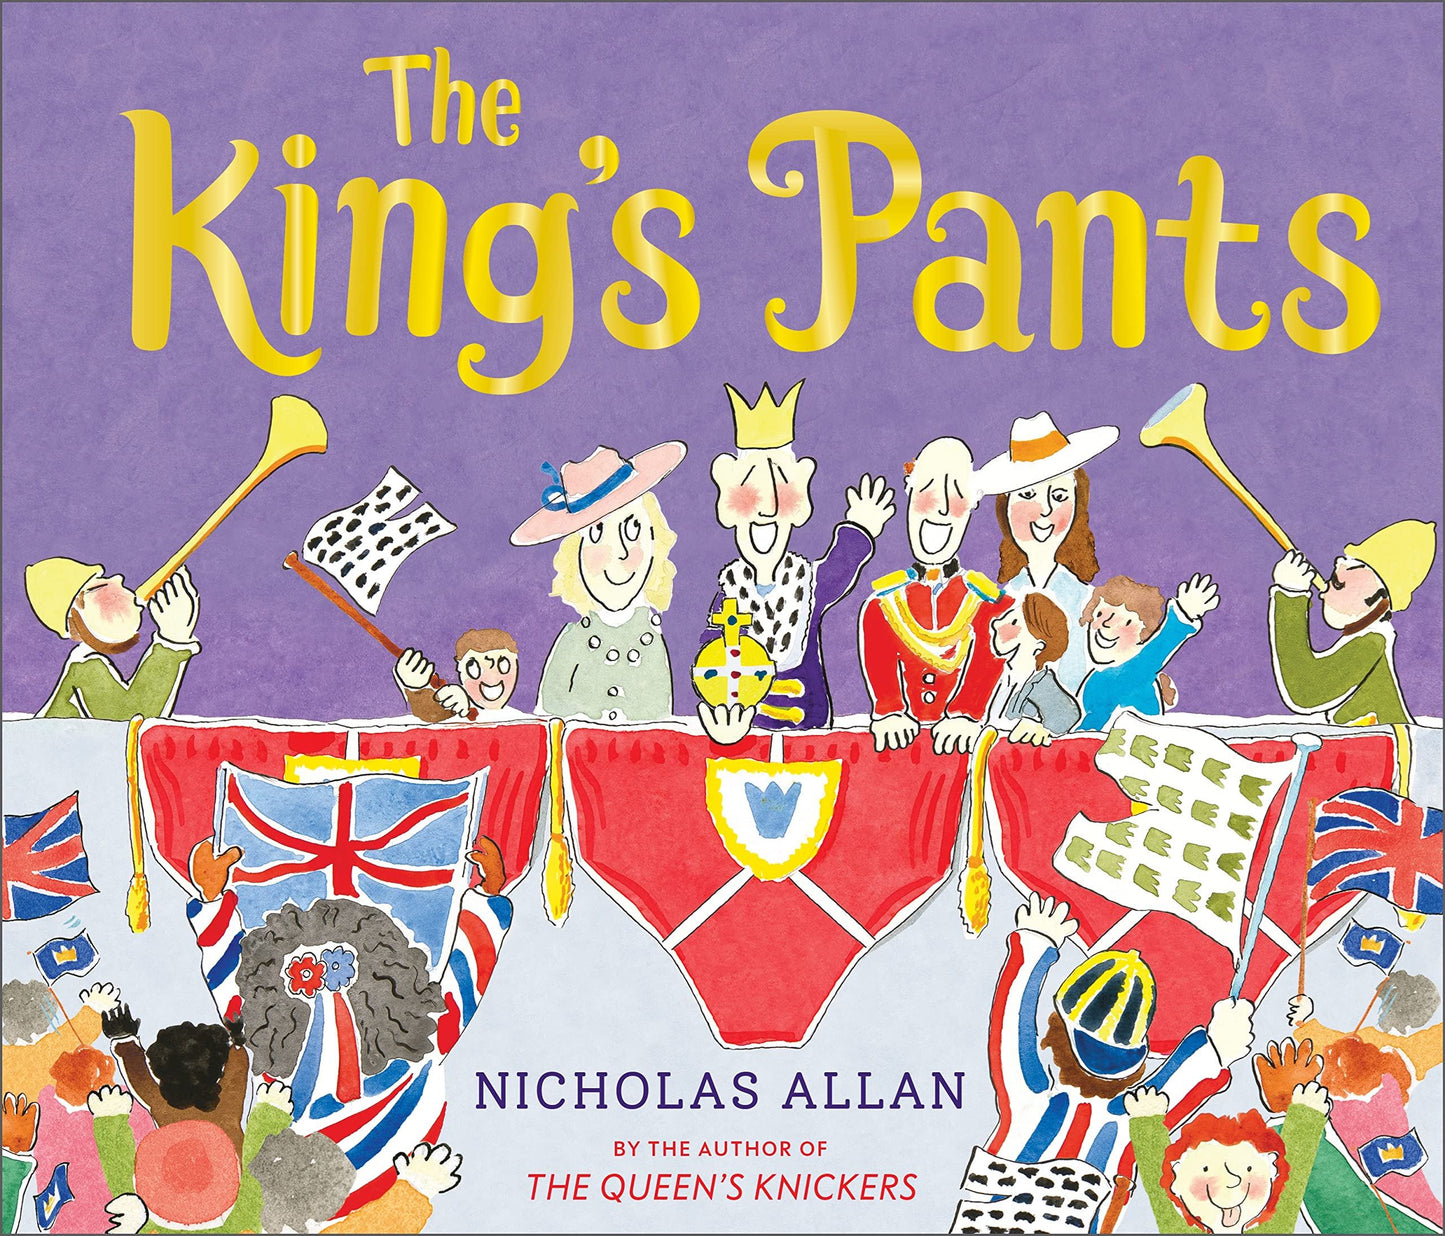 The King’s Pants